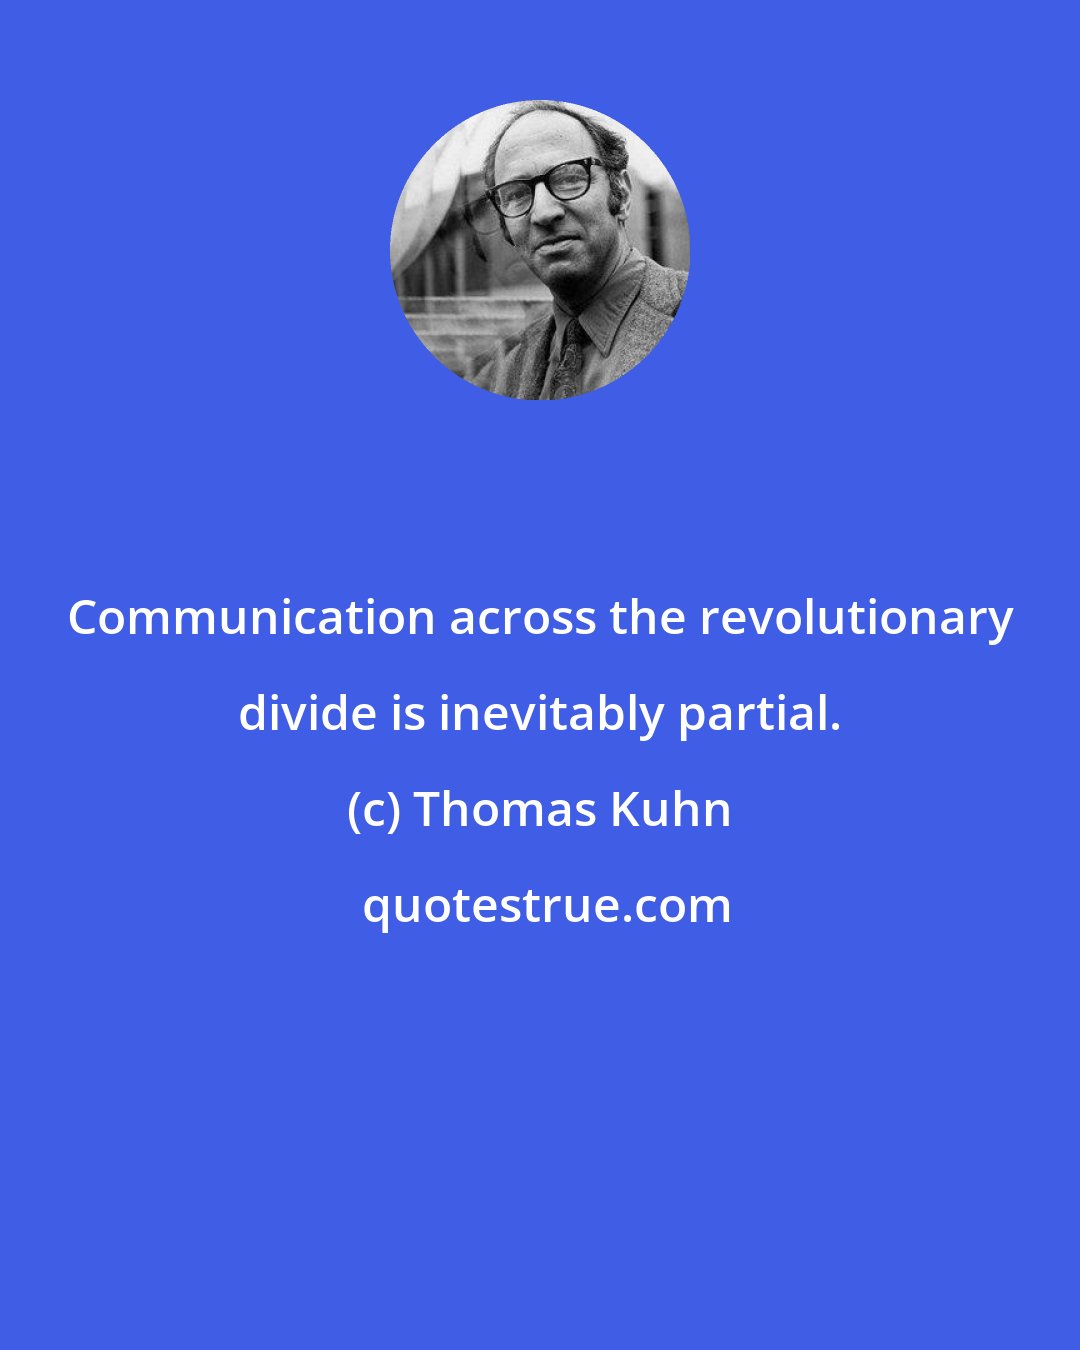 Thomas Kuhn: Communication across the revolutionary divide is inevitably partial.